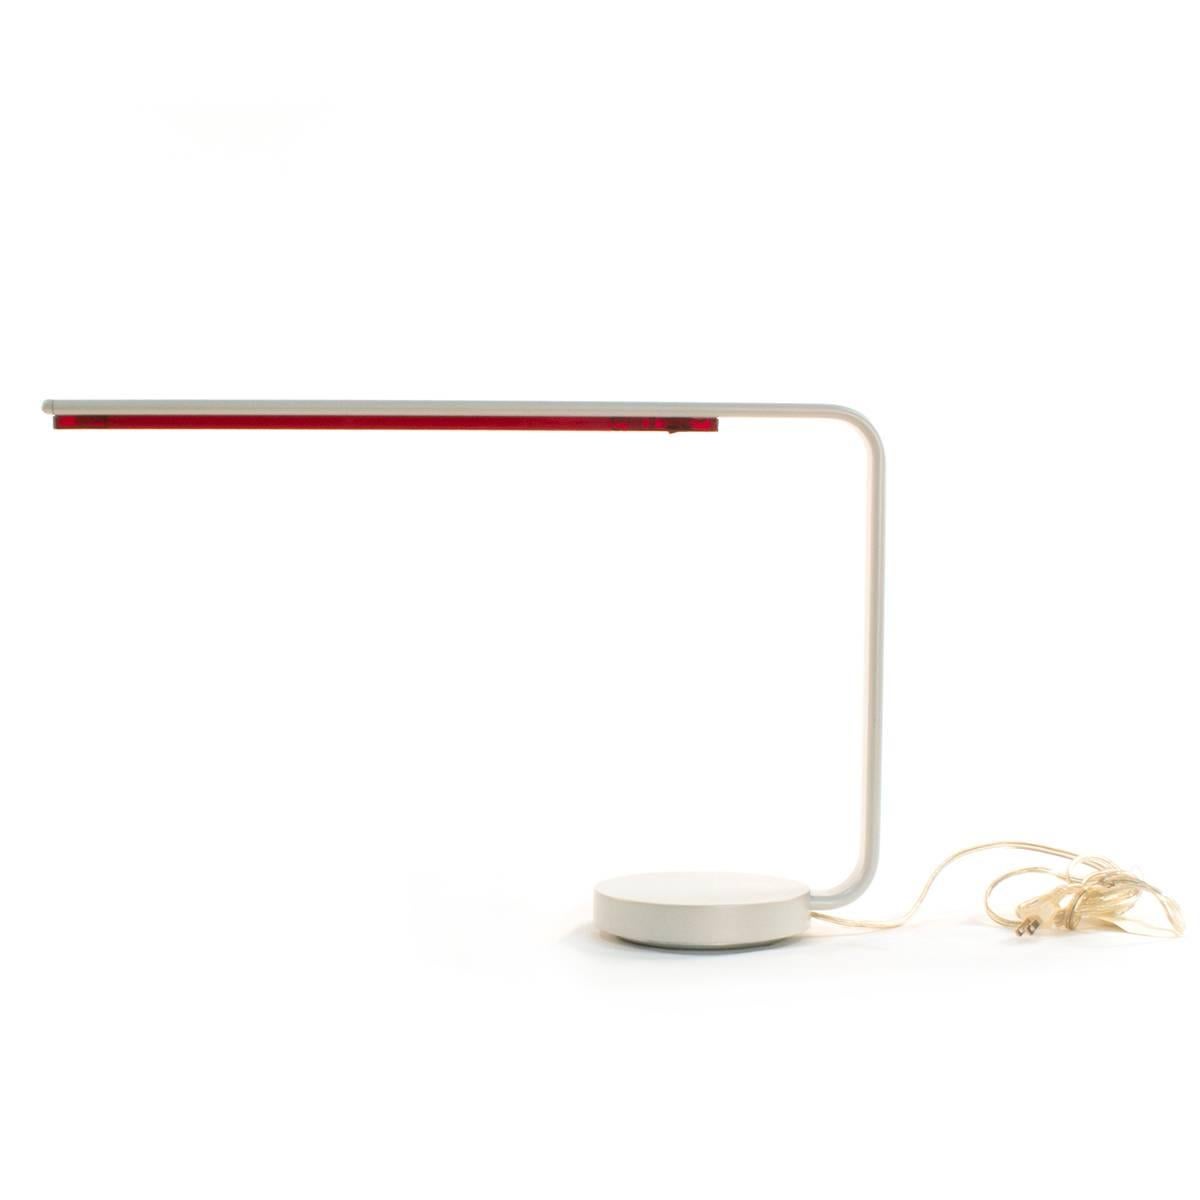 The one line table lamp by Ora Ito is a study in minimal yet functional lighting. The stream lined body is compact but gives a strong light output.